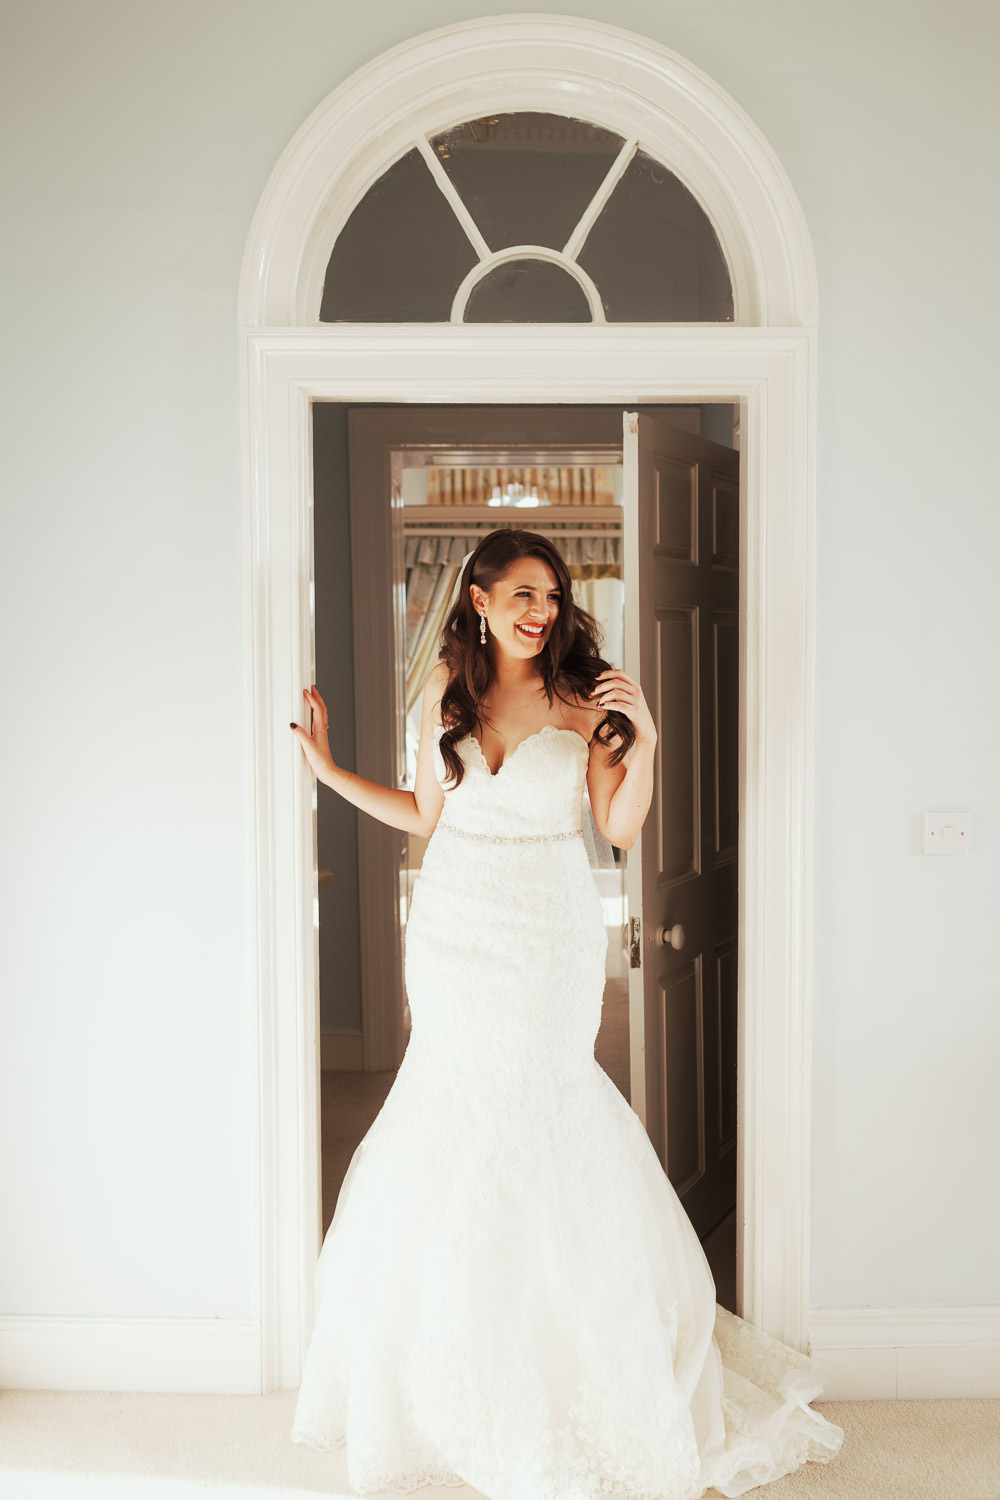 Bride in lace mermaid style wedding dress by Mori Lee, style 2713. Long dark hair and red lipstick, smiling in doorway of Queen's Apartment. Captured by regular Gosfield Hall documentary wedding photographer Tracy, based in Essex.